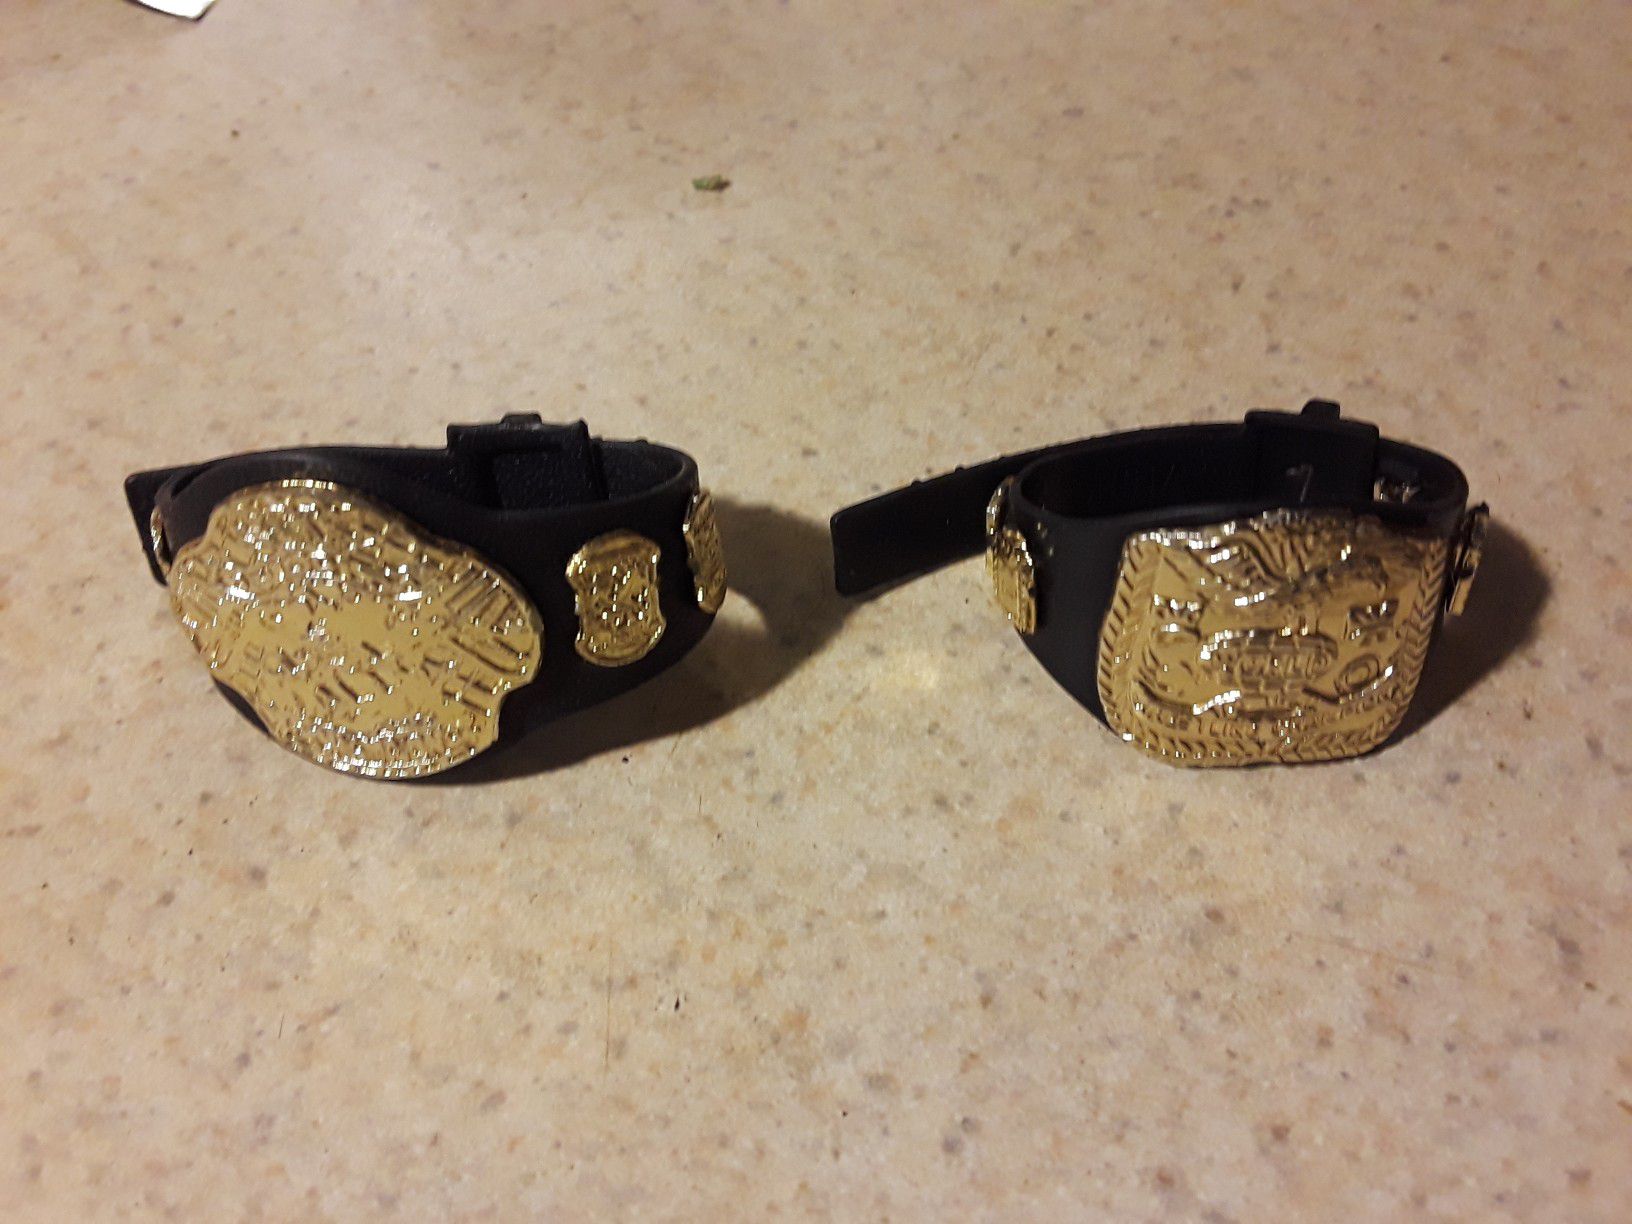 WWE belts for action figures